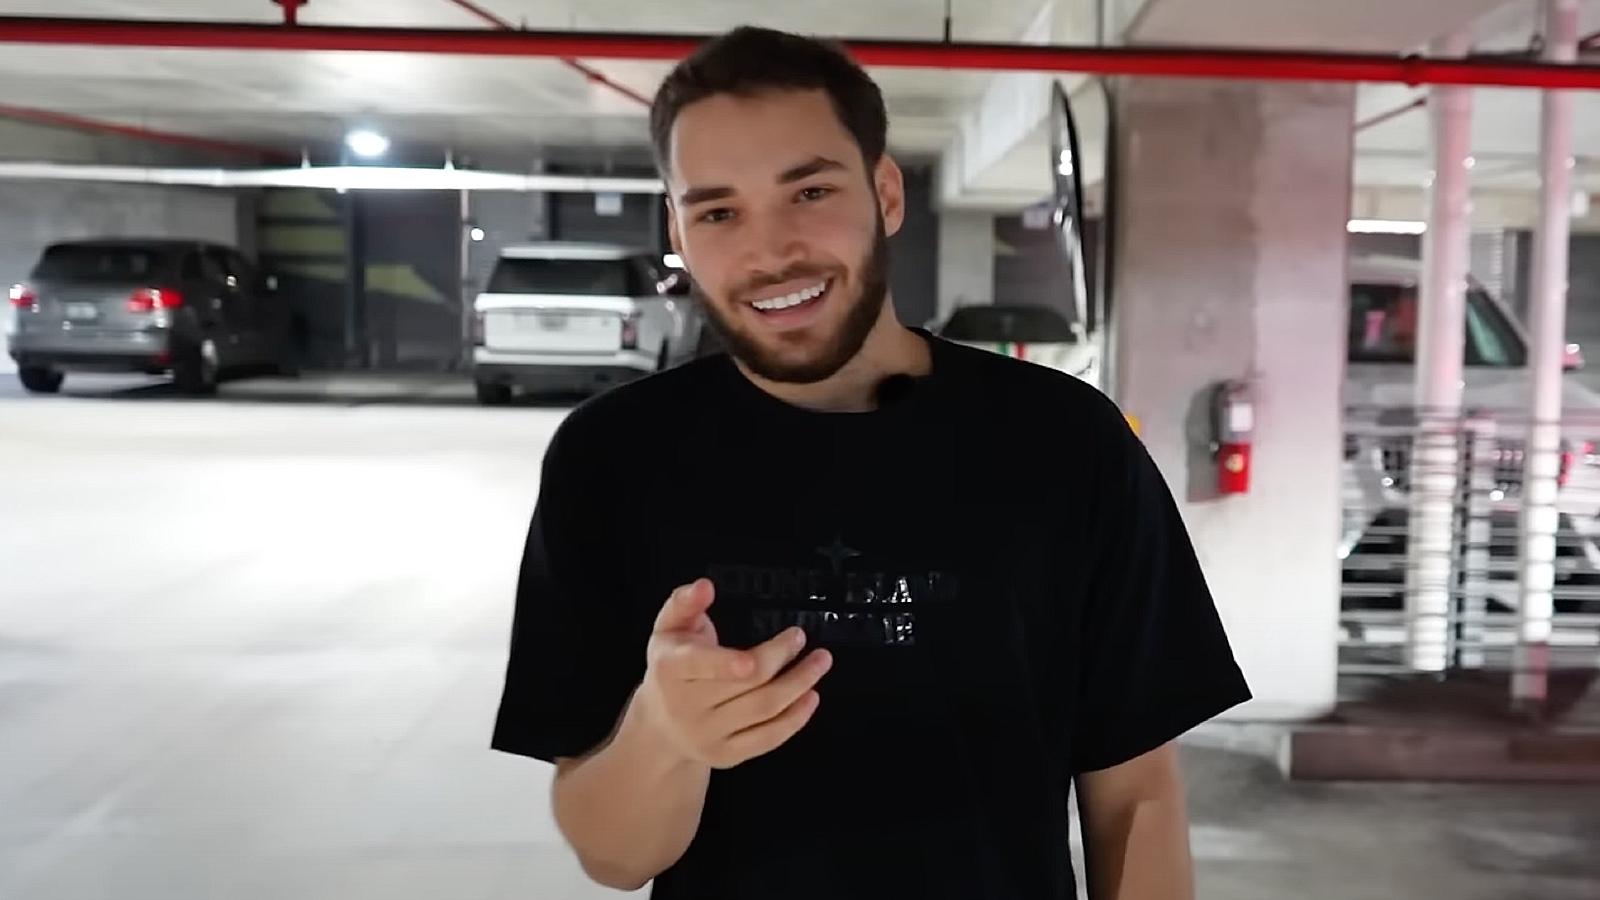 Adin Ross pointing at camera and smiling in parking lot